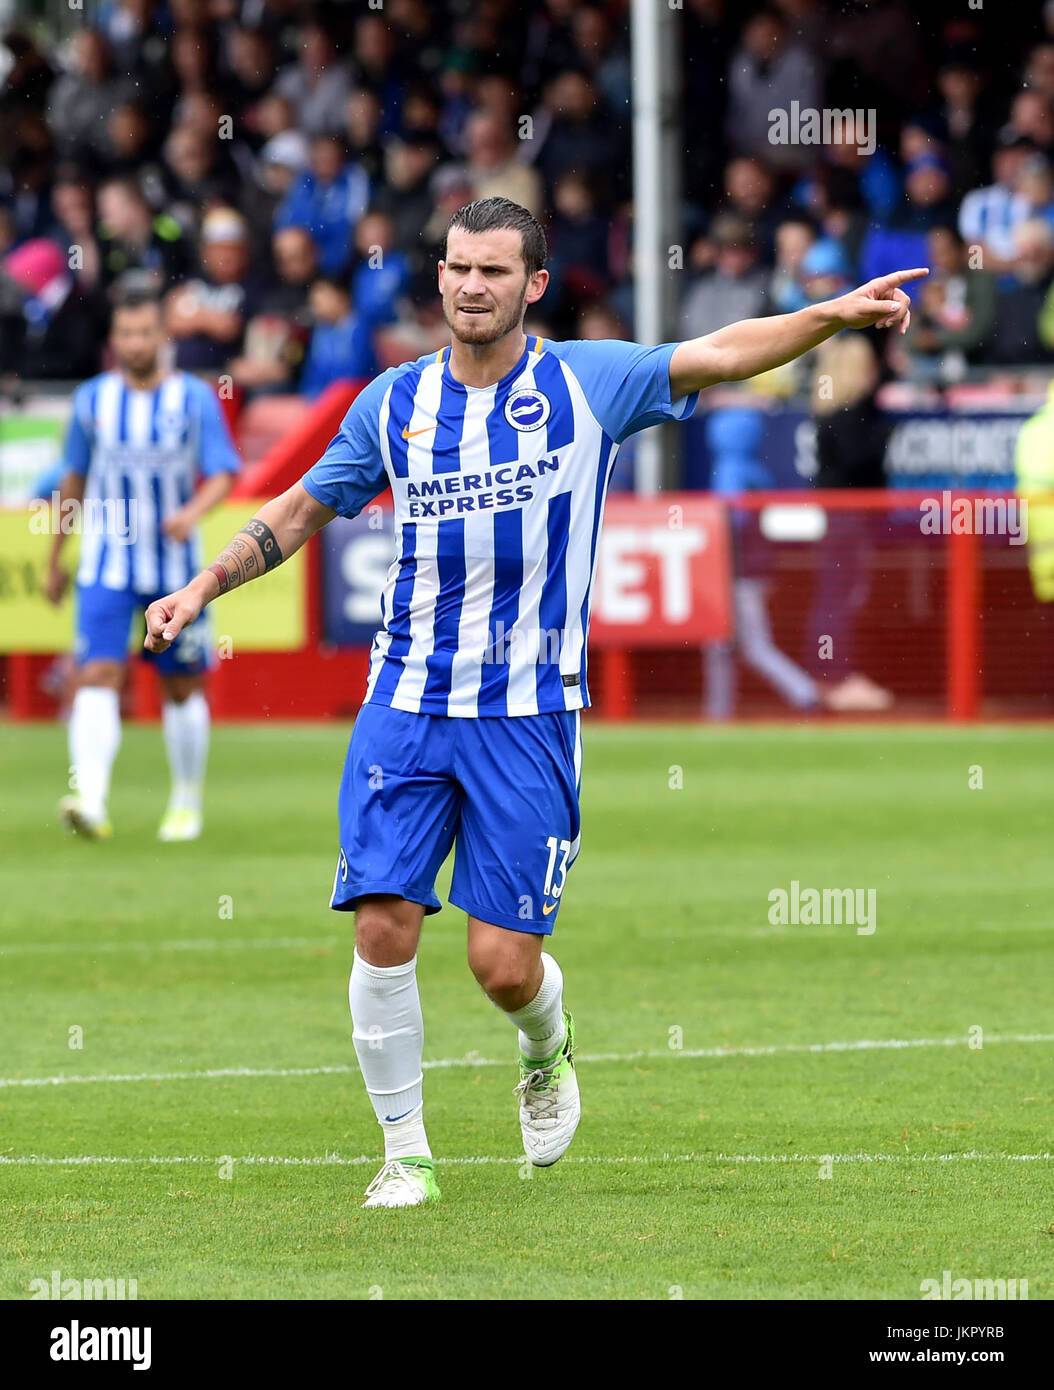 Pascal Gross of Brighton during the Friendly match between Crawley Town and Brighton and Hove Albion at the Checkatrade Stadium in Crawley. 22 Jul 2017 - Editorial use only. No merchandising. For Football images FA and Premier League restrictions apply inc. no internet/mobile usage without FAPL license - for details contact Football Dataco Stock Photo